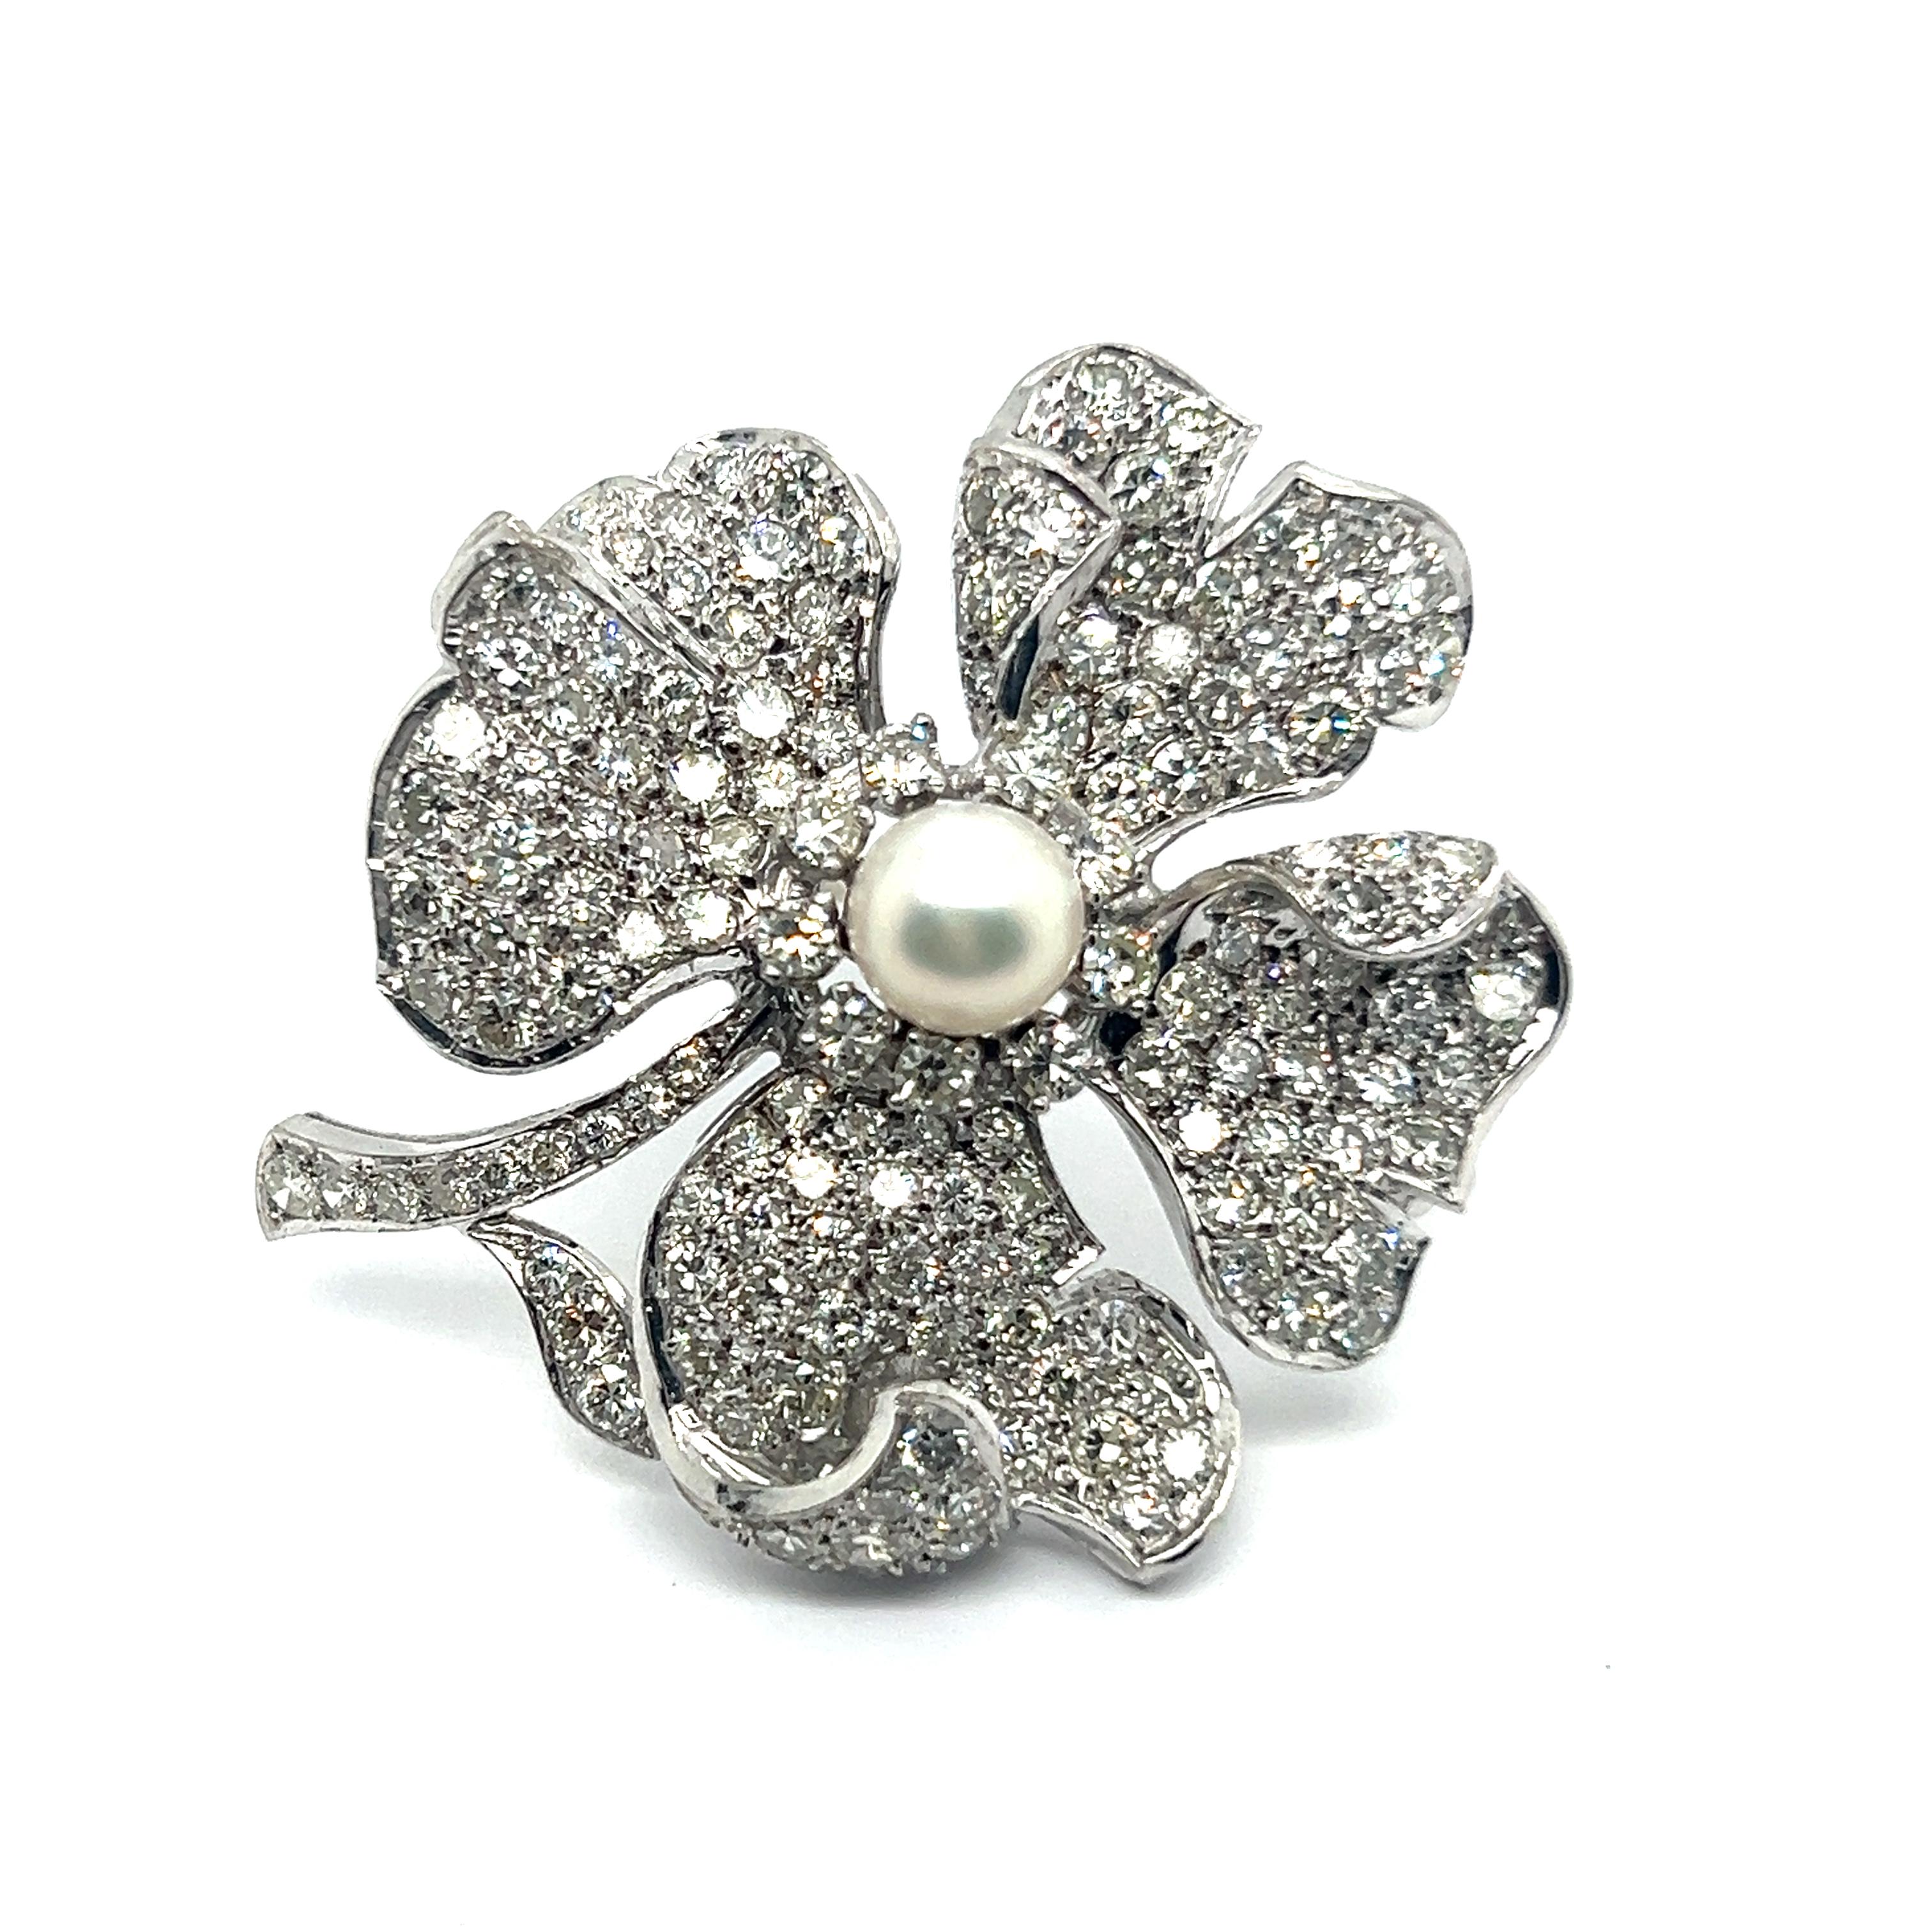 Evoking the ethereal beauty of a freshly picked spring blossom, this exquisite flower brooch embodies timeless elegance. 

Skillfully fashioned in platinum, it blooms with an array of 154 dazzling diamonds, G-H color and vvs clarity, totaling 4.60